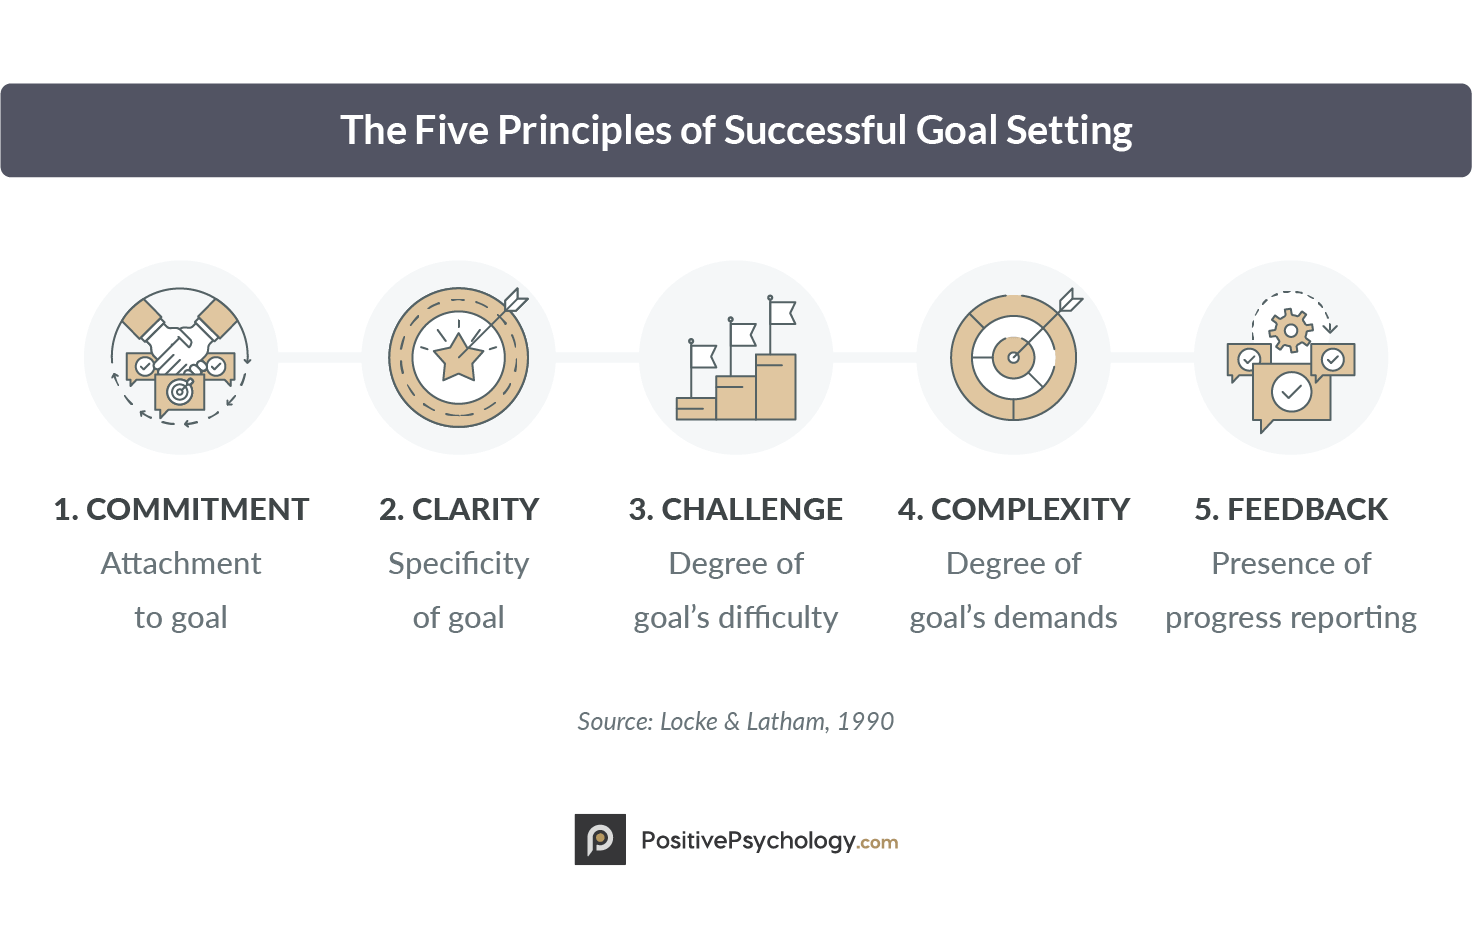 The Five Principles of Successful Goal Setting